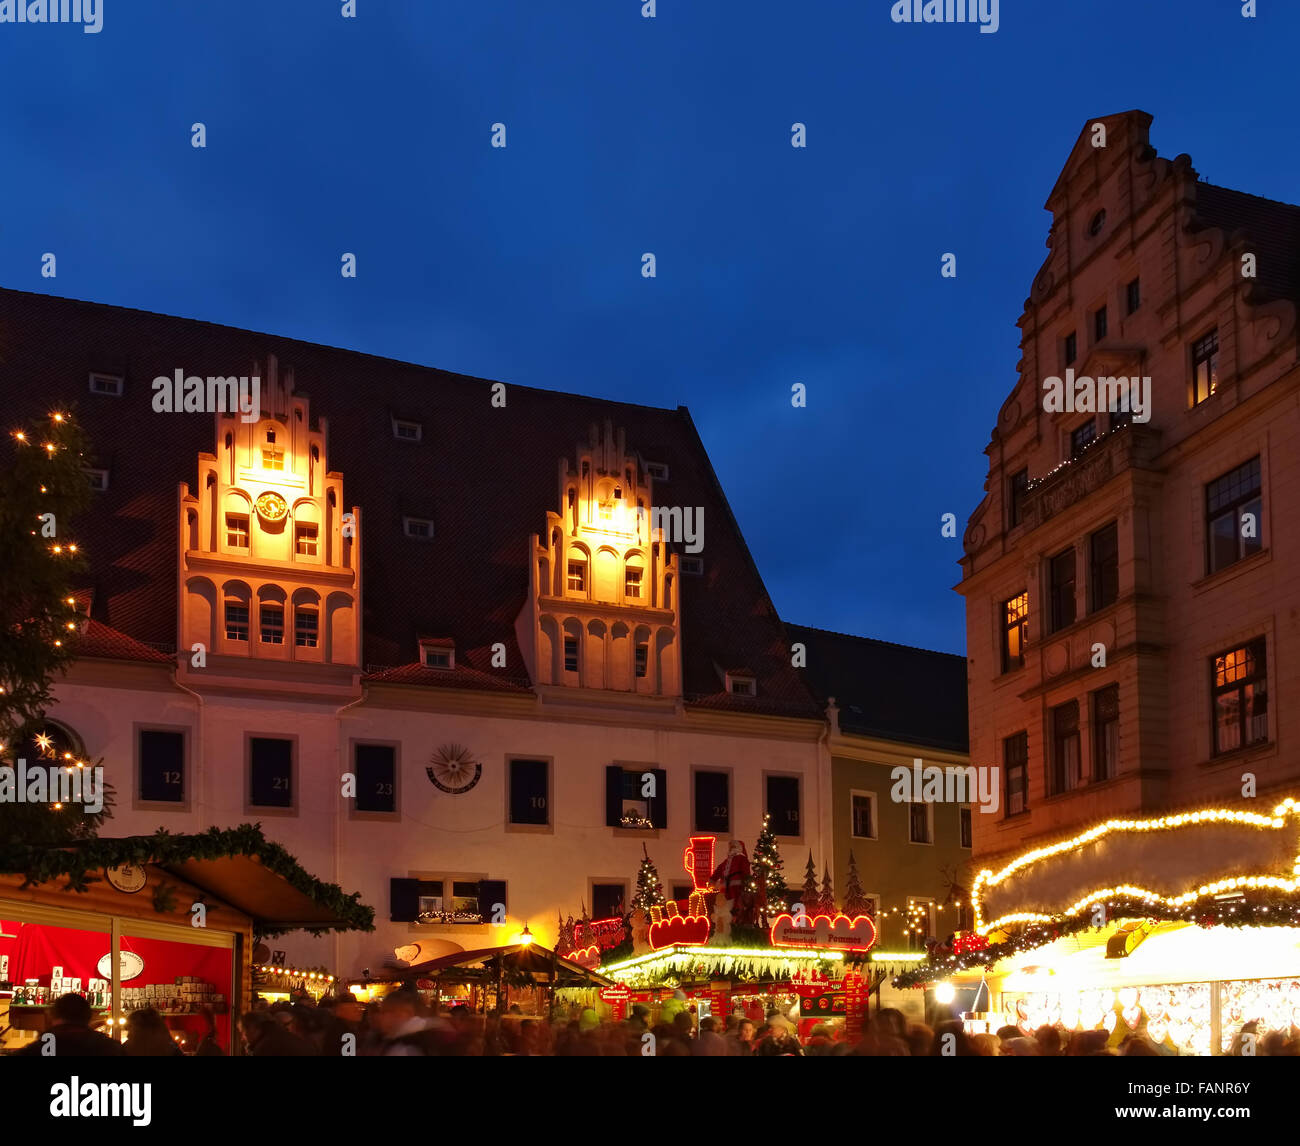 Page 2 - Meissen Winter High Resolution Stock Photography and Images - Alamy